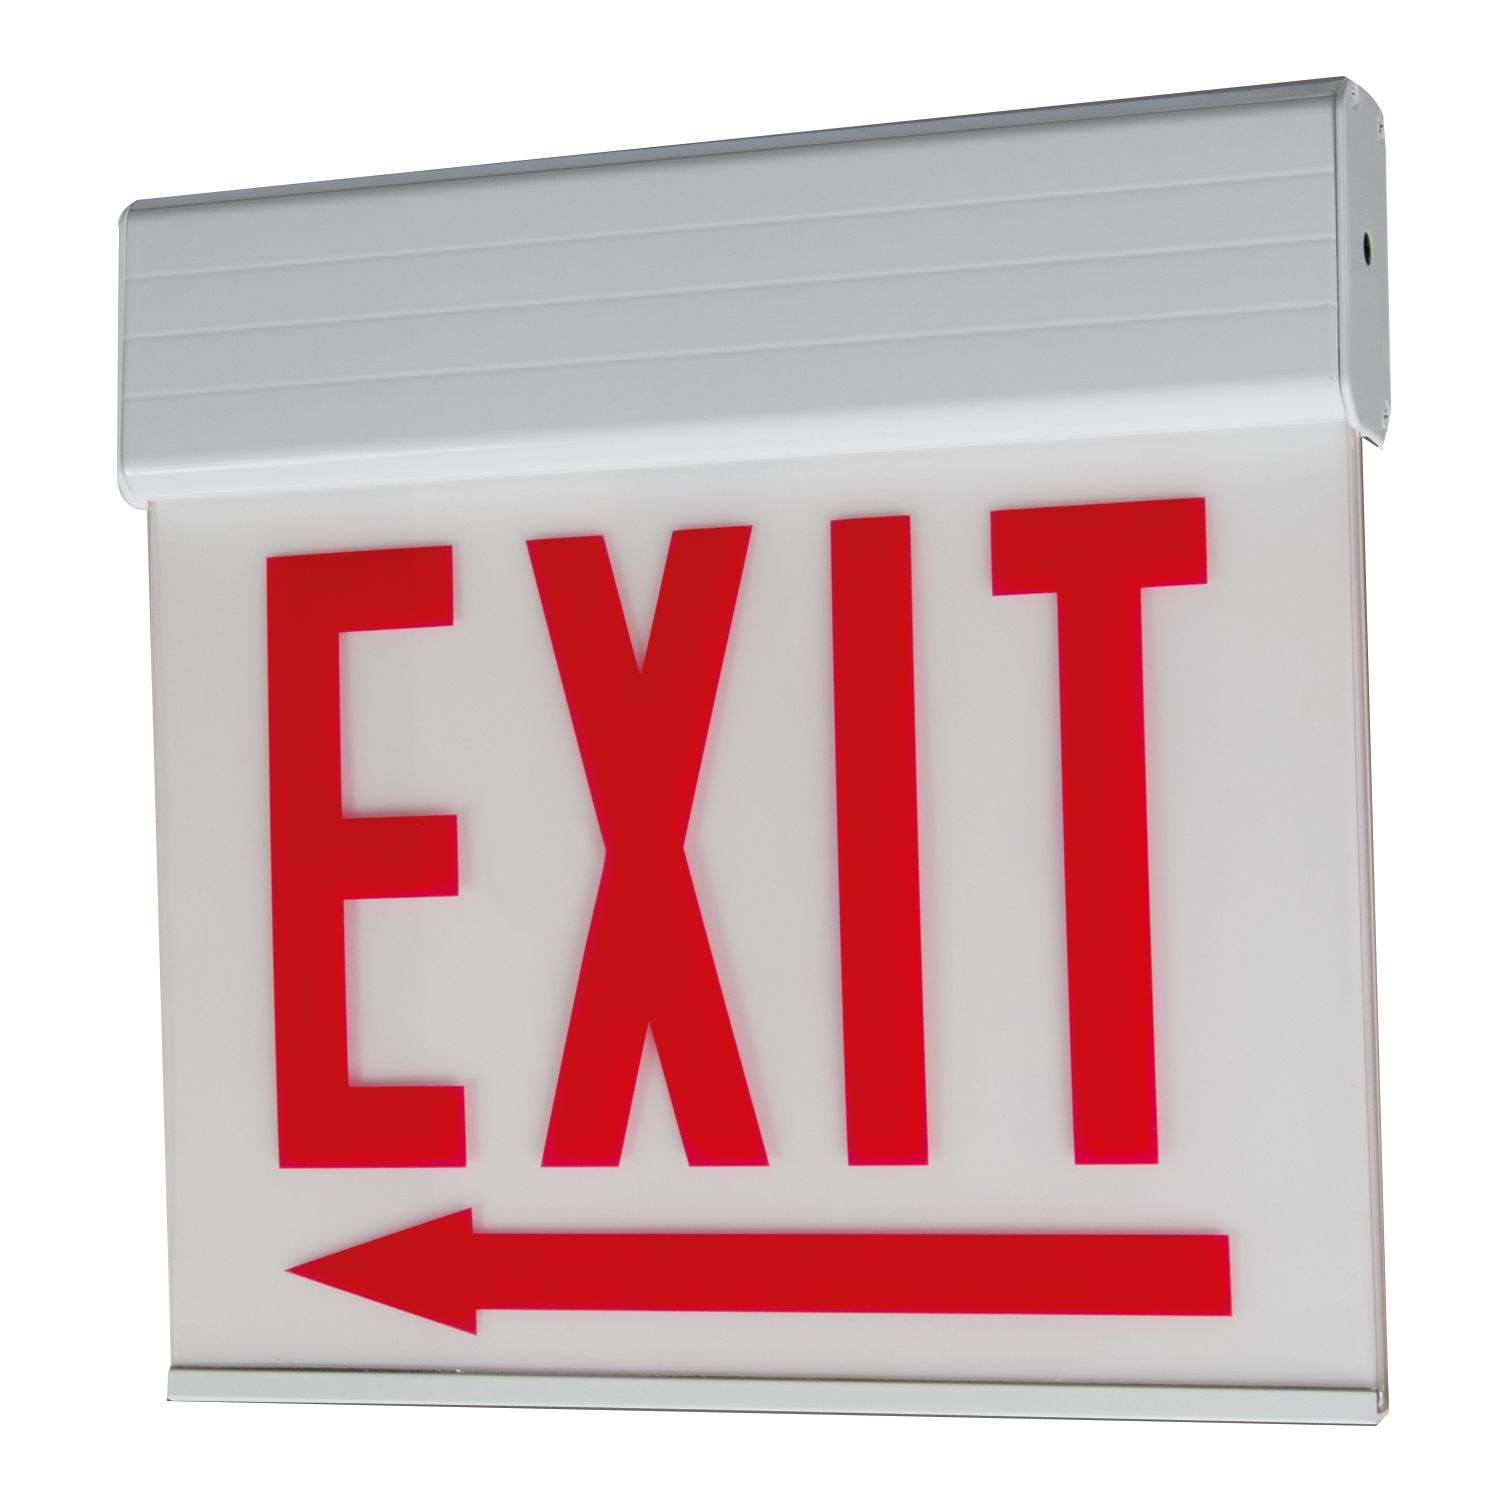 NIB Cooper Sure-Lites UHLED Recessed Housing For ELX Series LED Exit Sign 